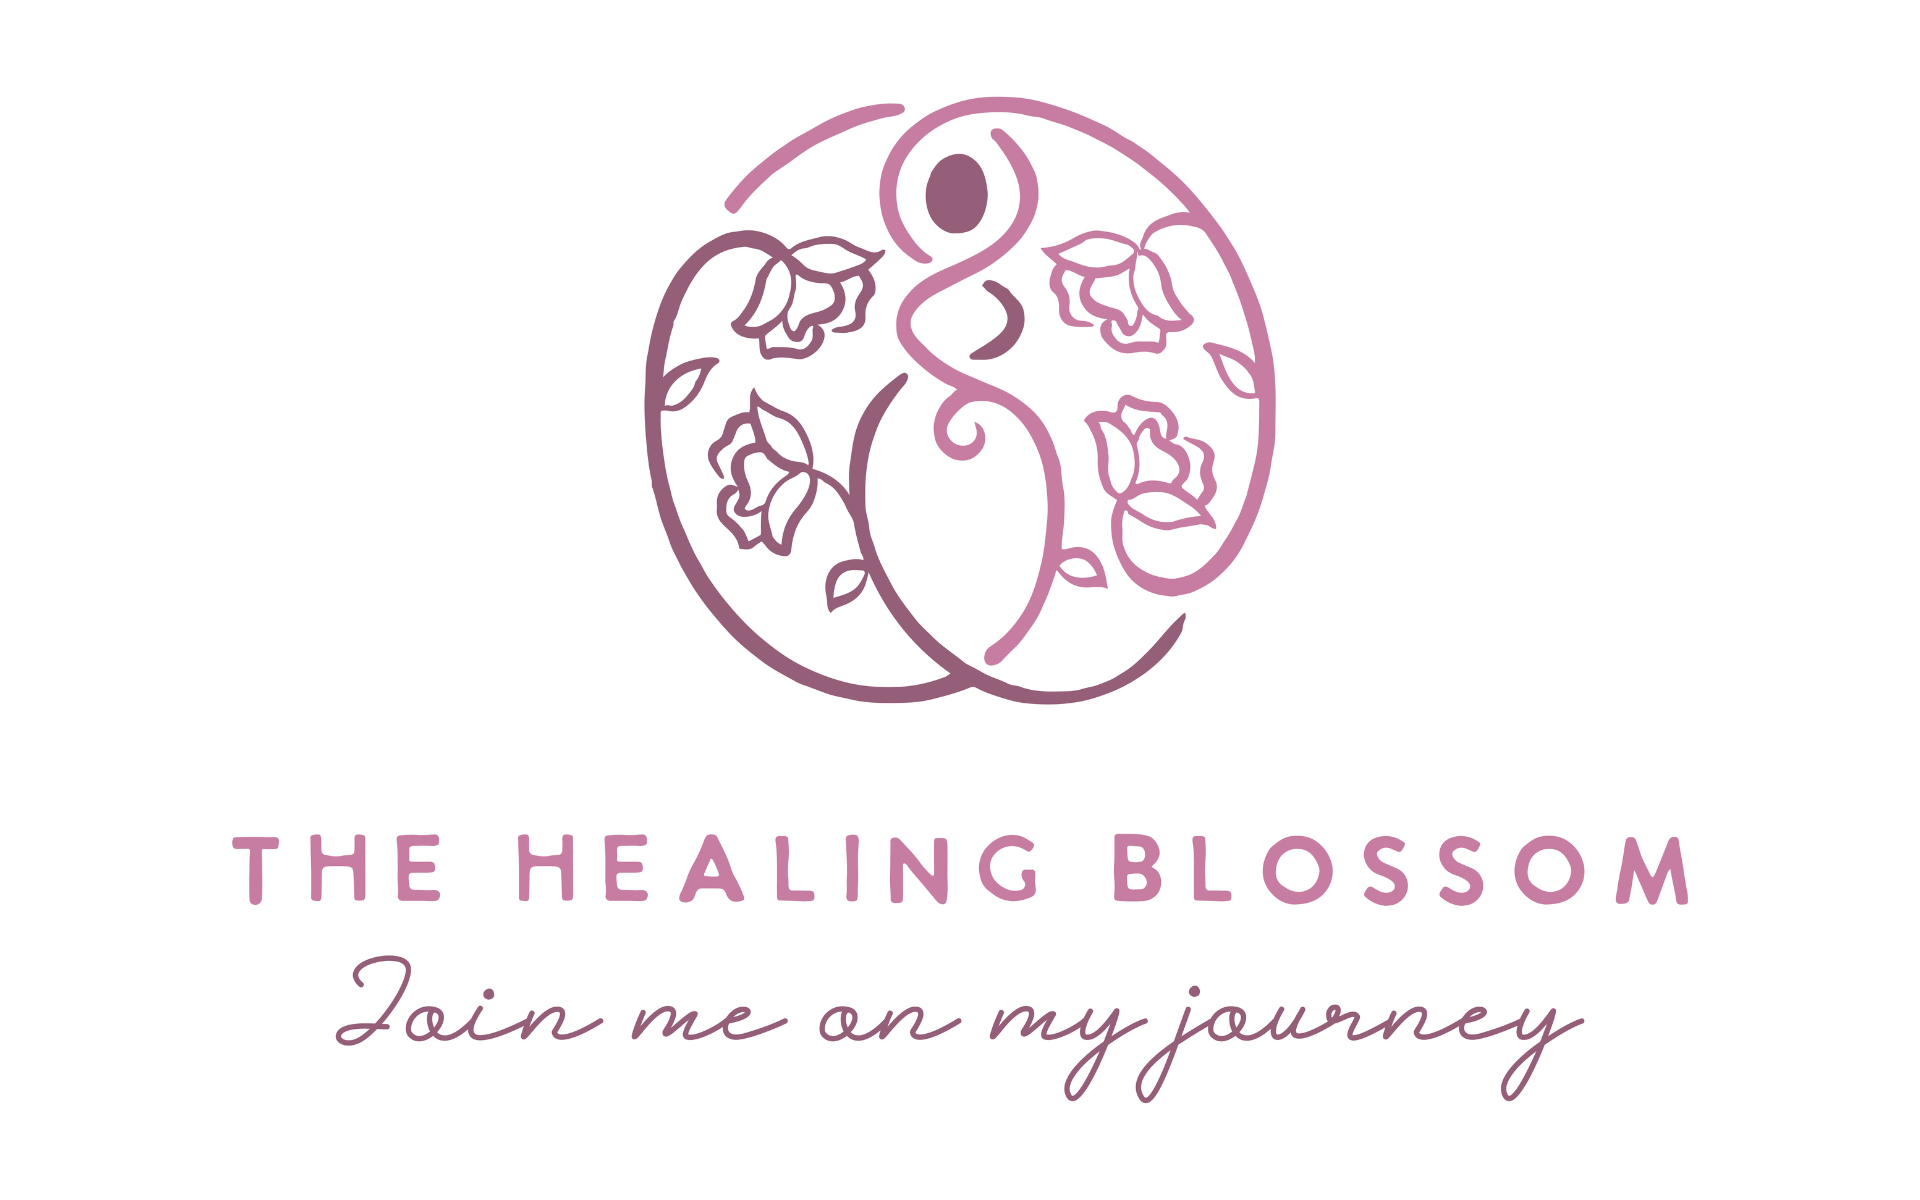 The Healing Blossom